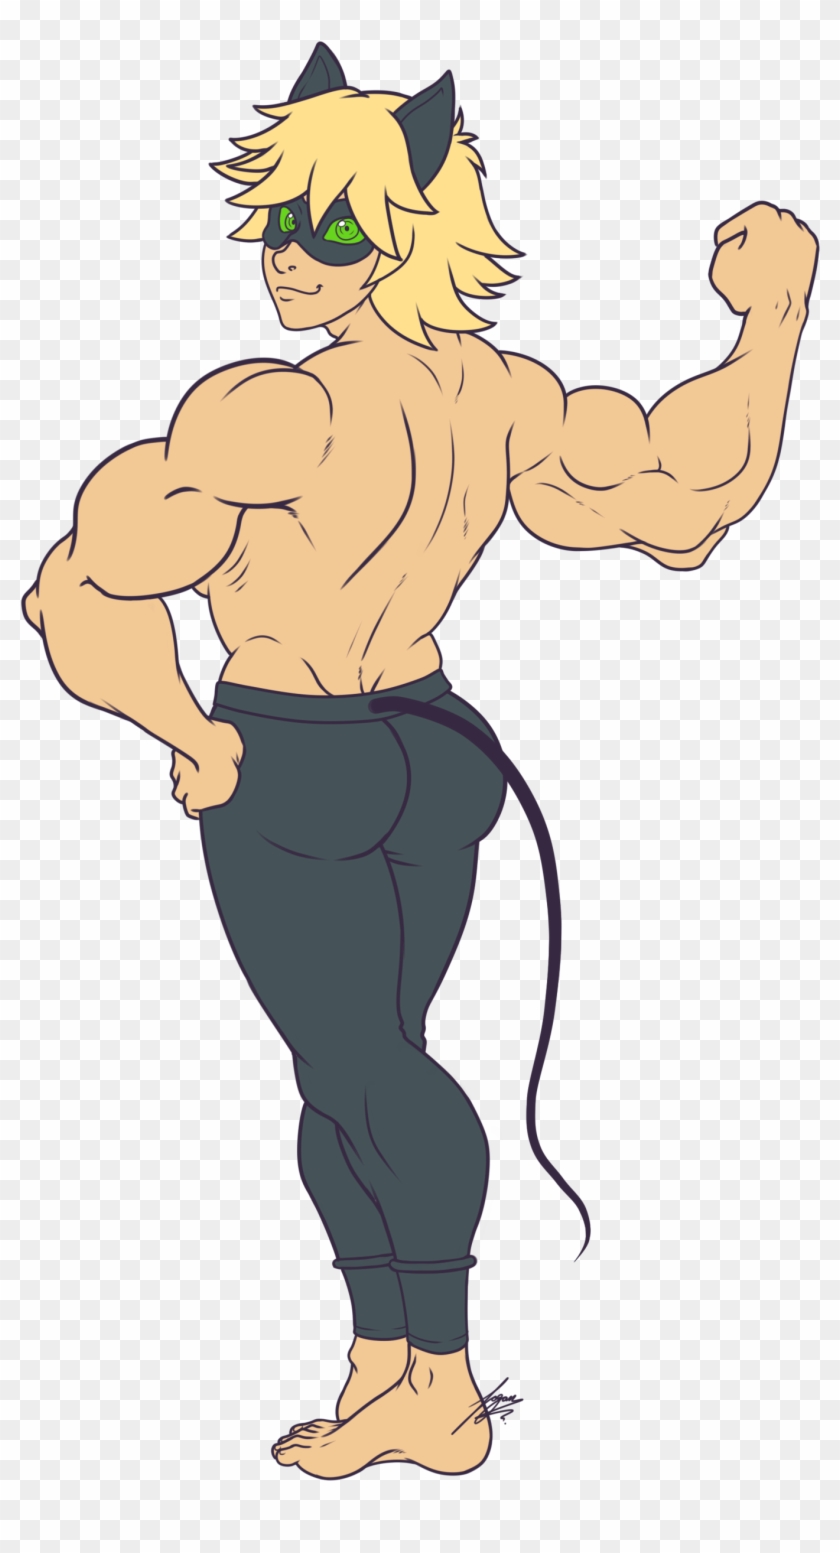 Muscle Chat Noir By Juacamo Dbgtjch Chat Noir Muscle Growth Hd Png Download 1354x2439 Pngfind